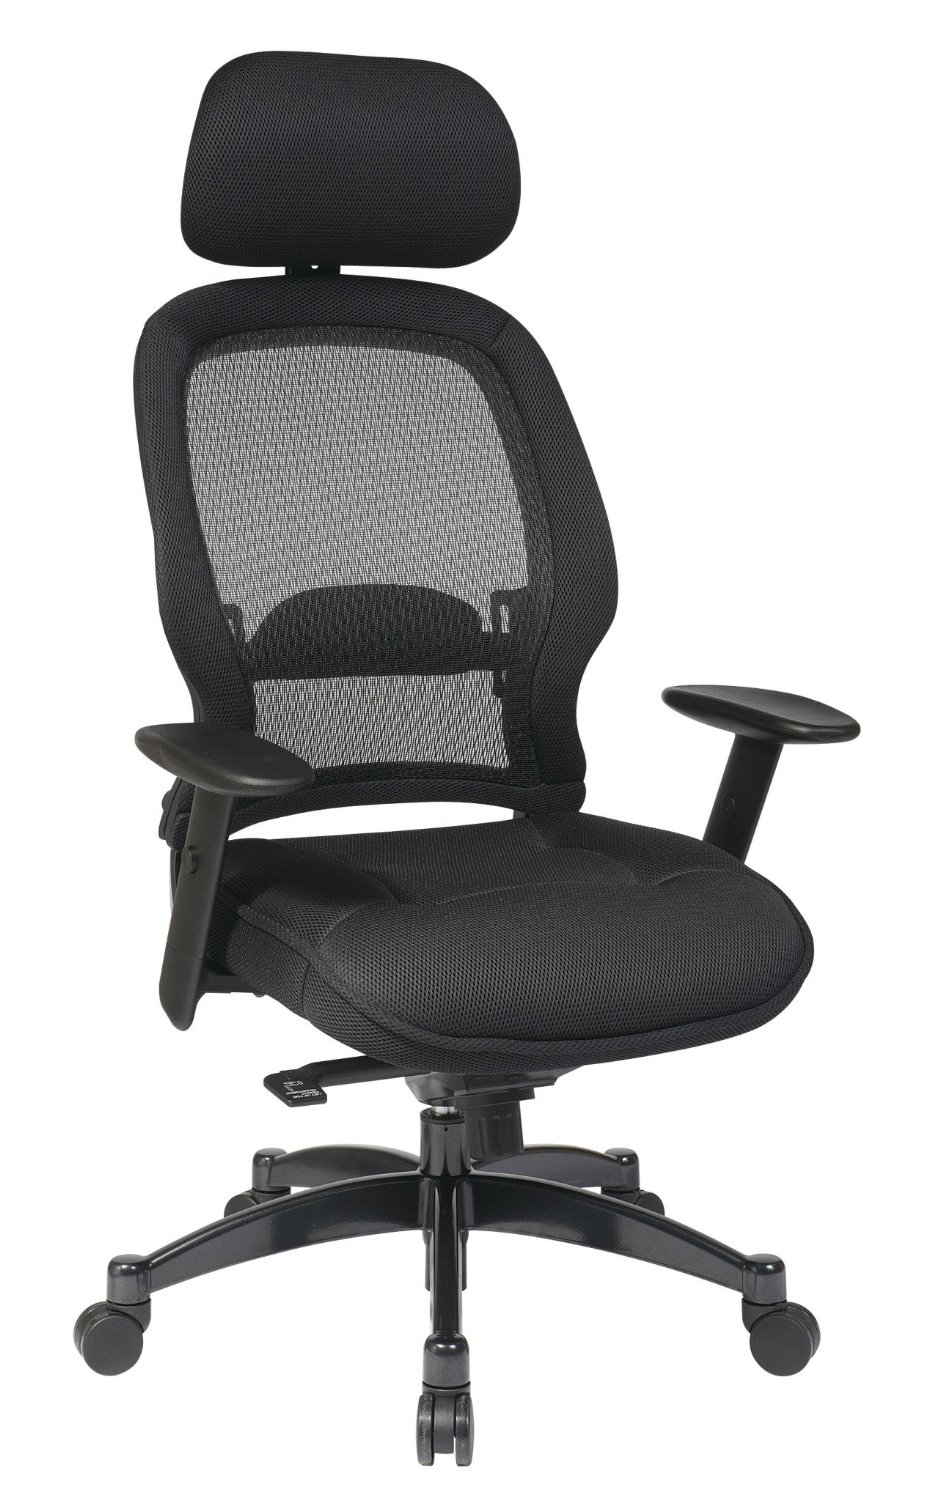 Best Adjustable Office Chair For Tall People